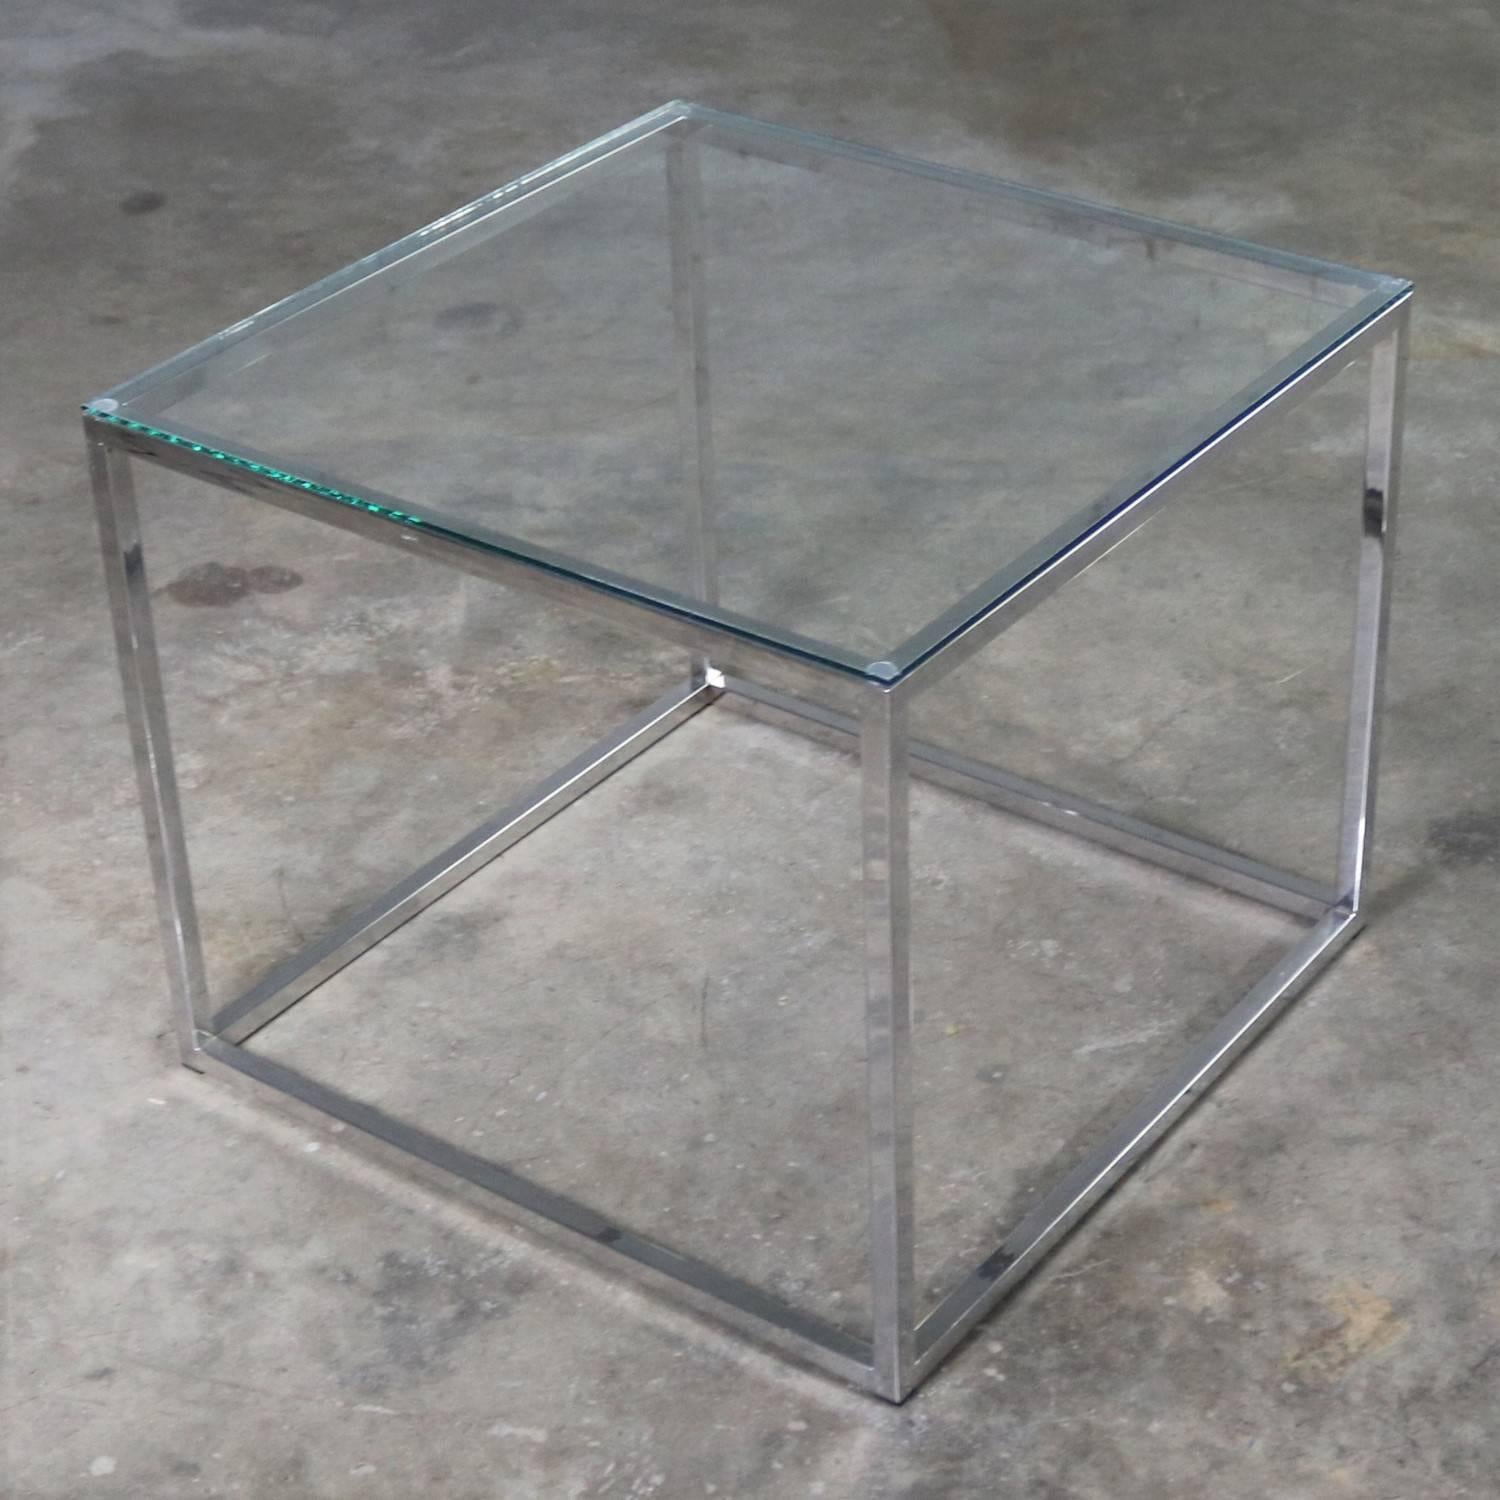 American Chrome Cube End Table with Glass Top Manner of Milo Baughman